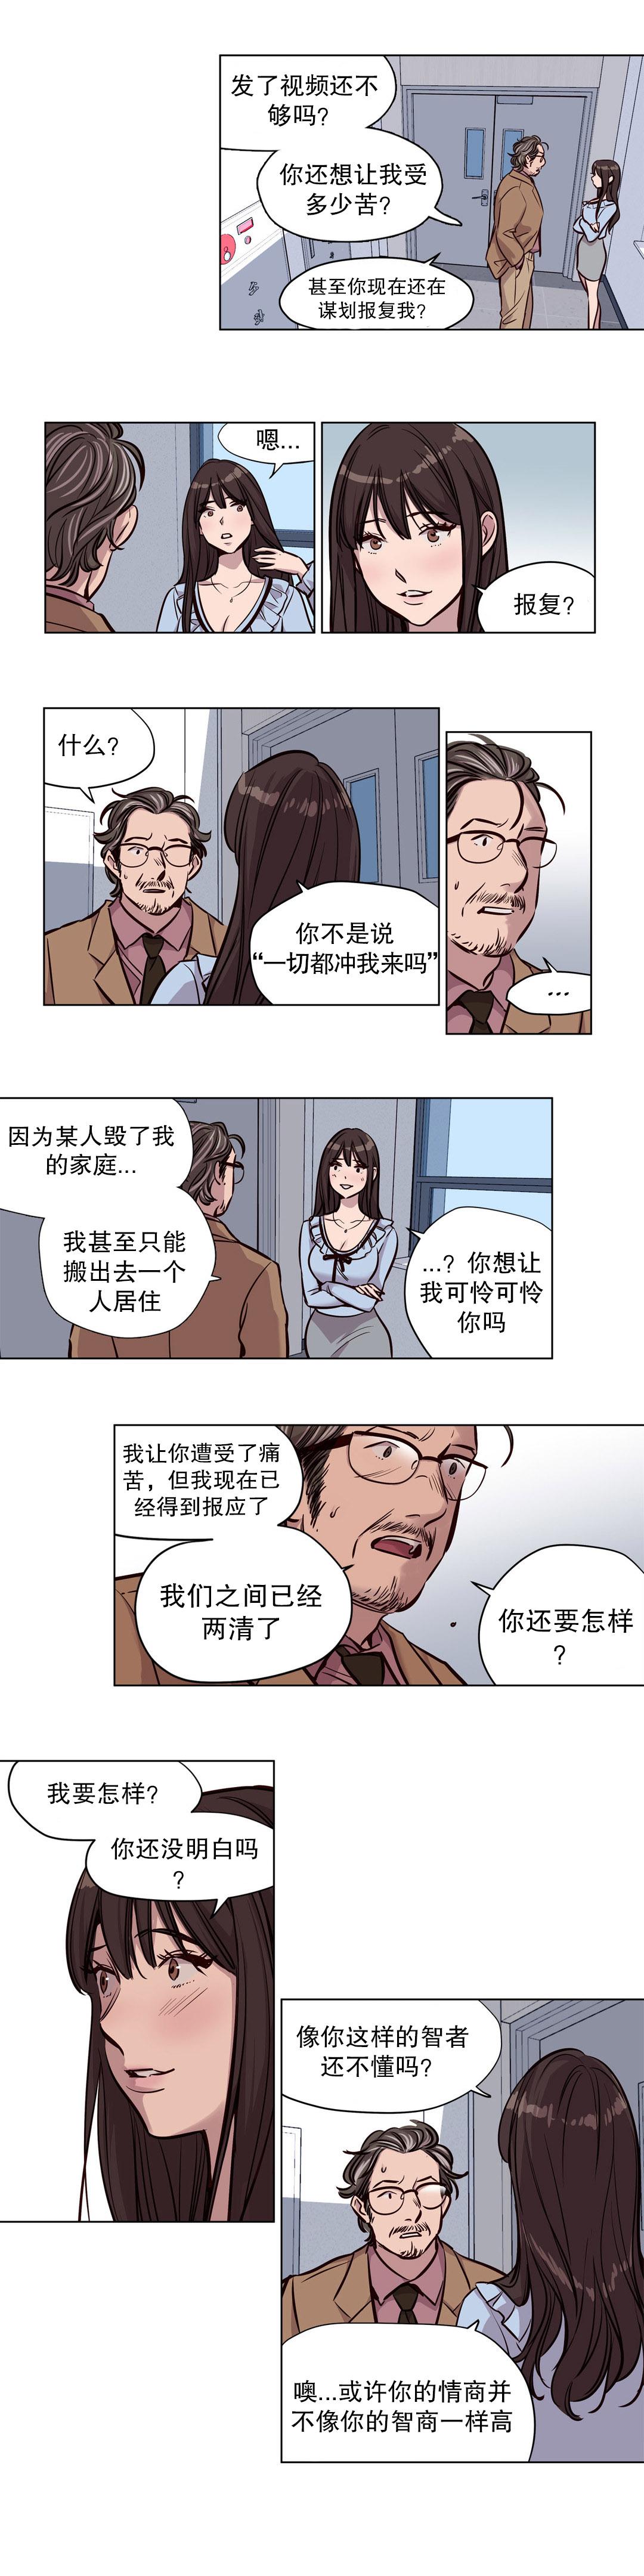 18 Year Old [Ramjak] 赎罪营(Atonement Camp) Ch.50-52 (Chinese) Mallu - Page 10